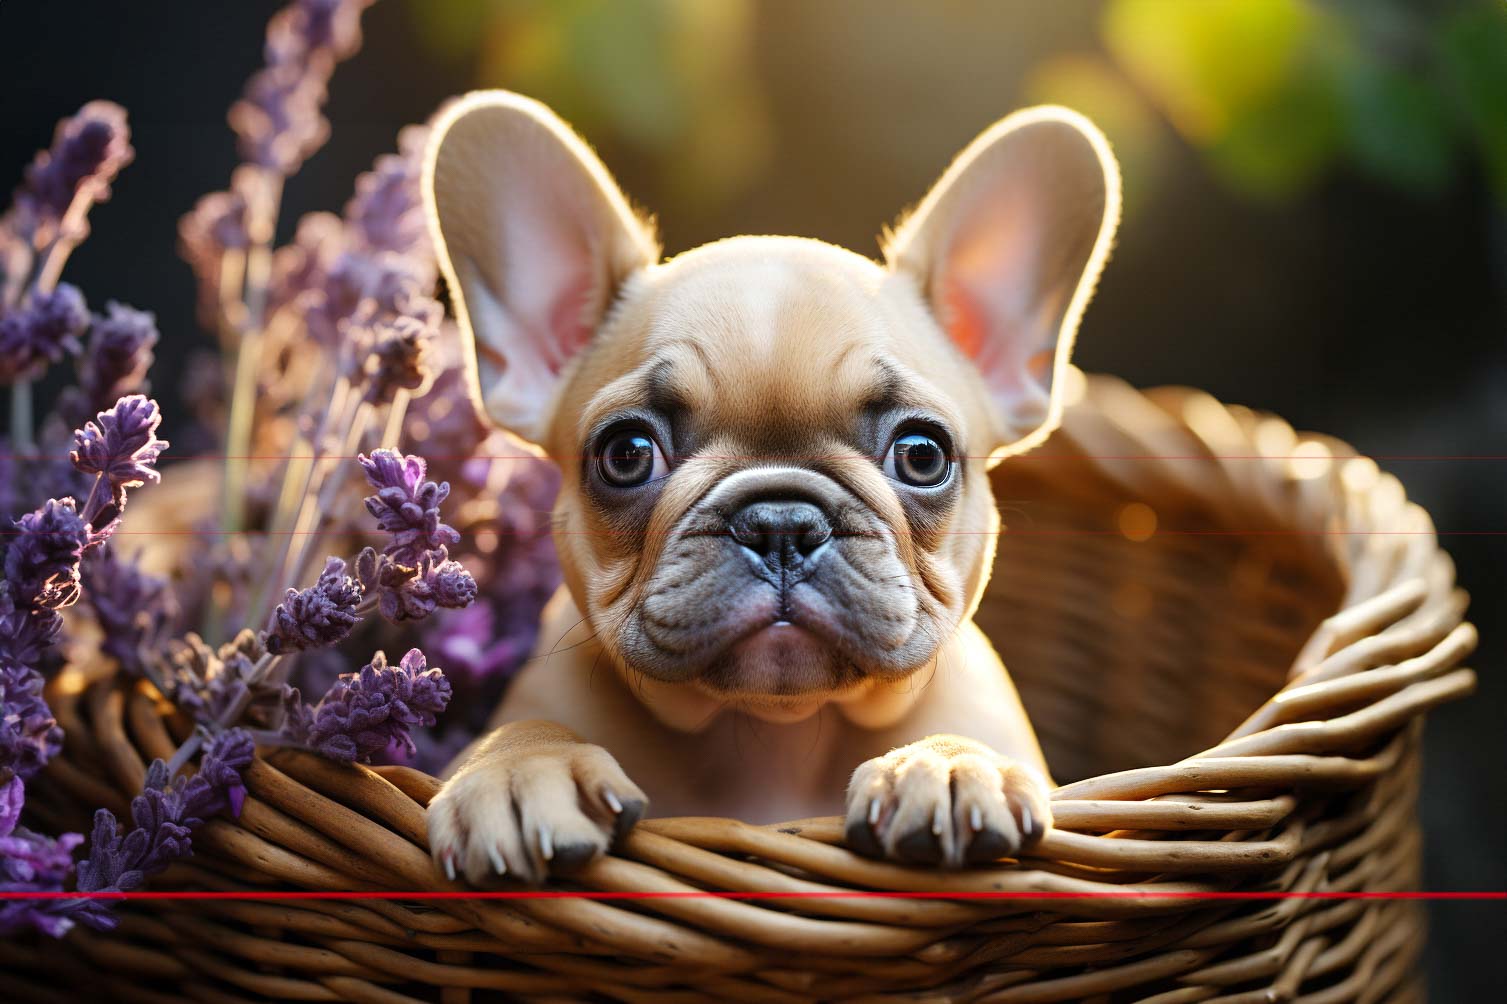 In this picture, a Cream and white French Bulldog puppy with large, expressive eyes, bat-like ears, short wrinkled snout is comfortably nestled inside a wicker basket. It peers over its outstretched arms surrounded by purple lavender sprigs.